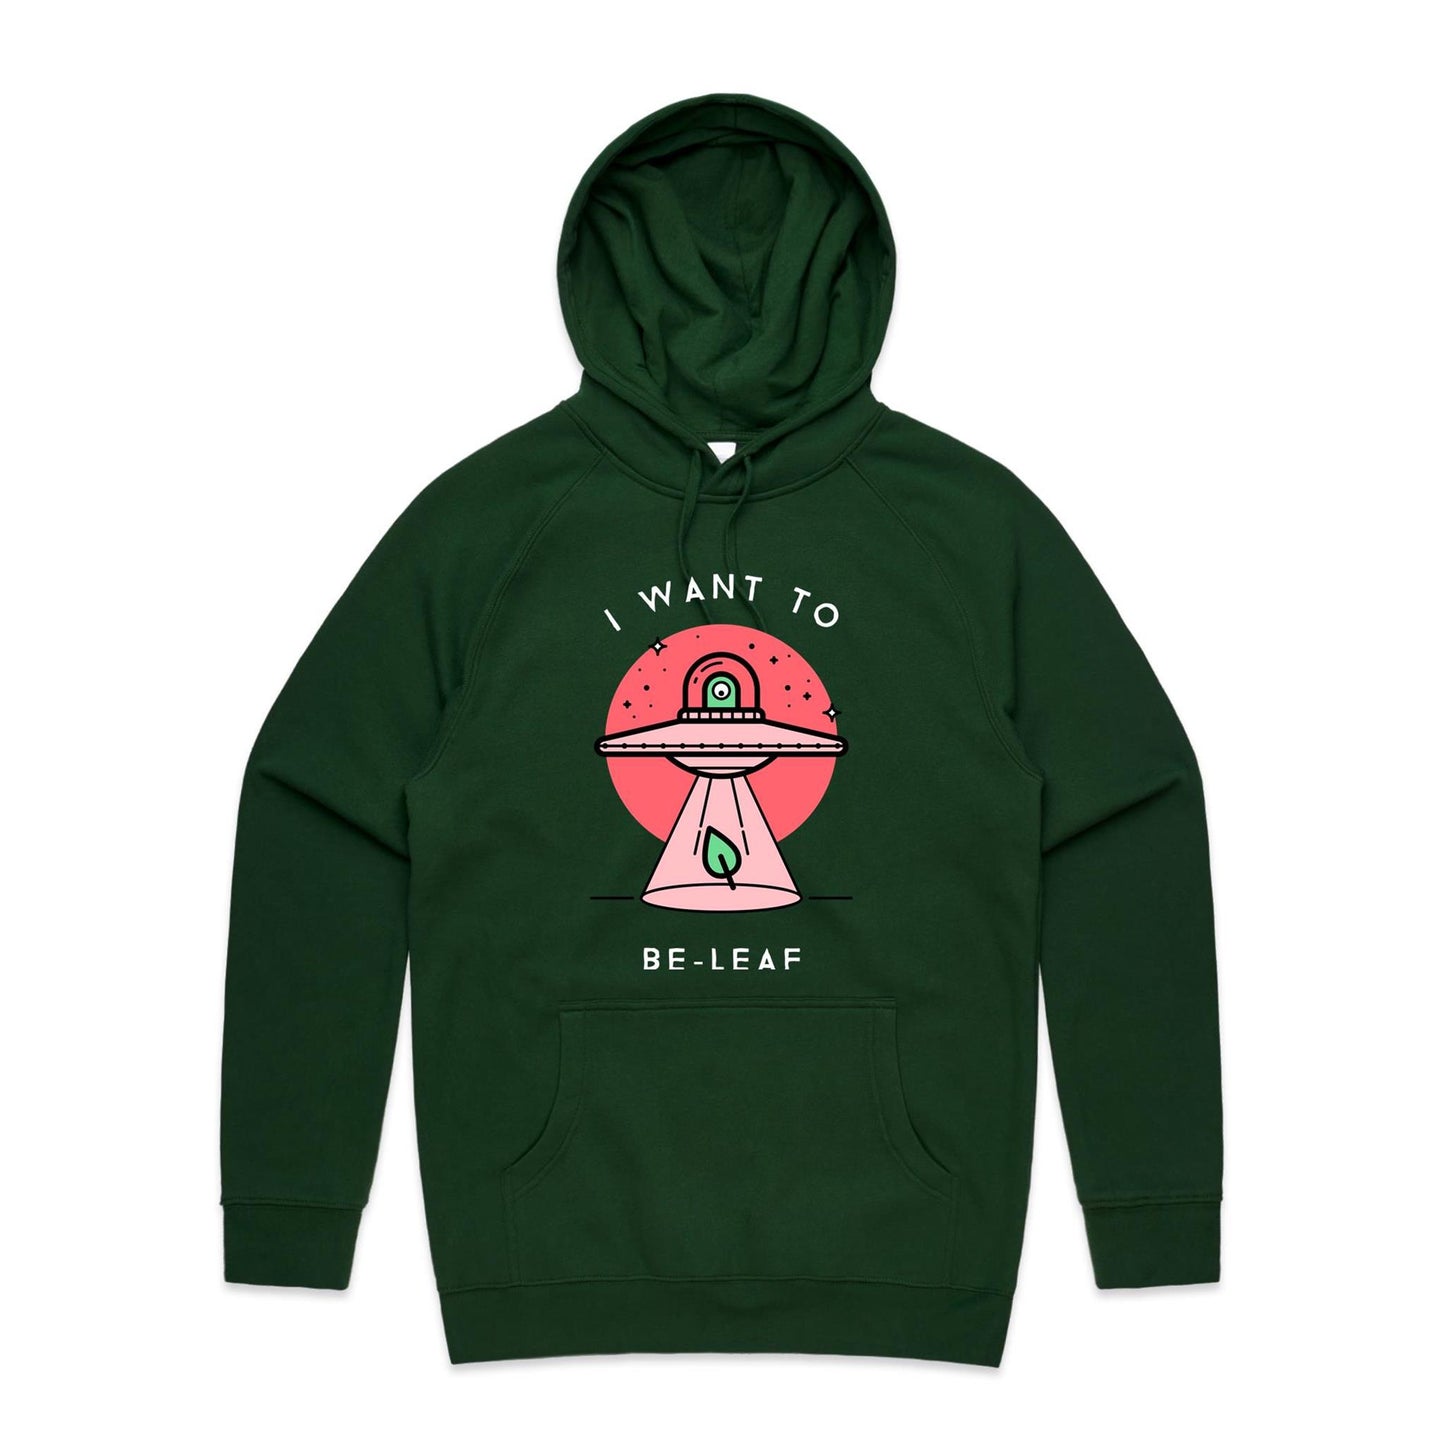 I Want To Be-Leaf (Beleive) - Supply Hood Forest Green Mens Supply Hoodie